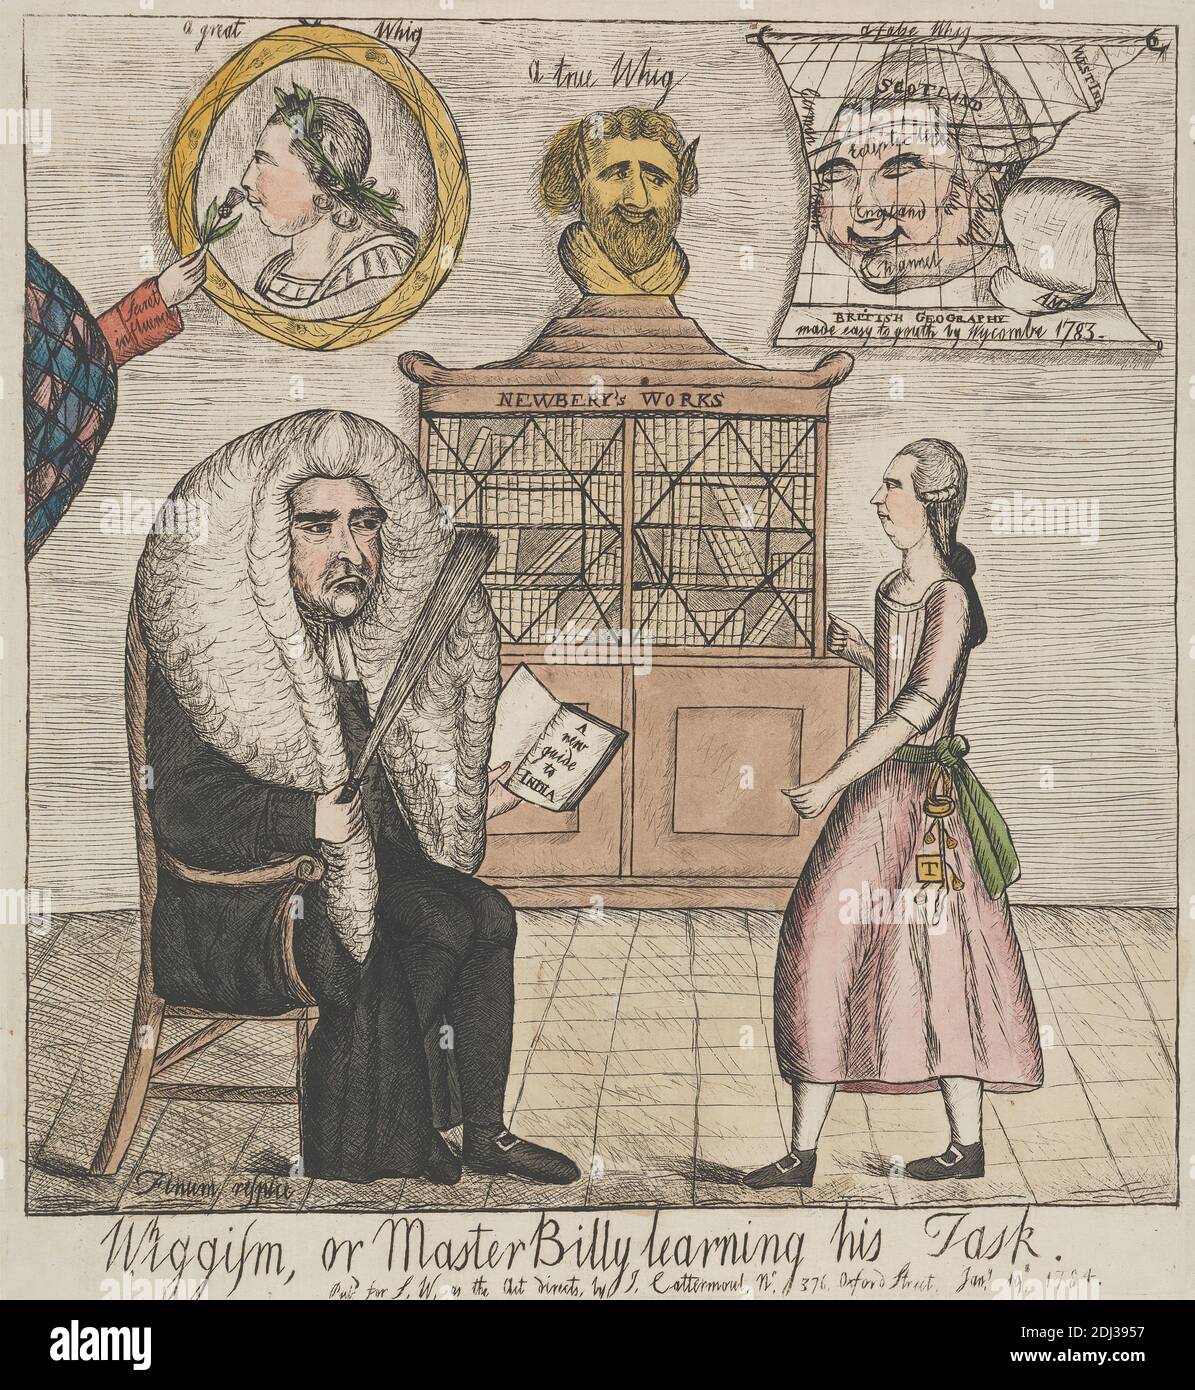 Whiggism, or Master Billy learning his Task, William Dent, active 1784–1793, 1784, Etching with hand color on laid paper, Sheet: 9 1/2 x 8 5/8in. (24.1 x 21.9cm Stock Photo